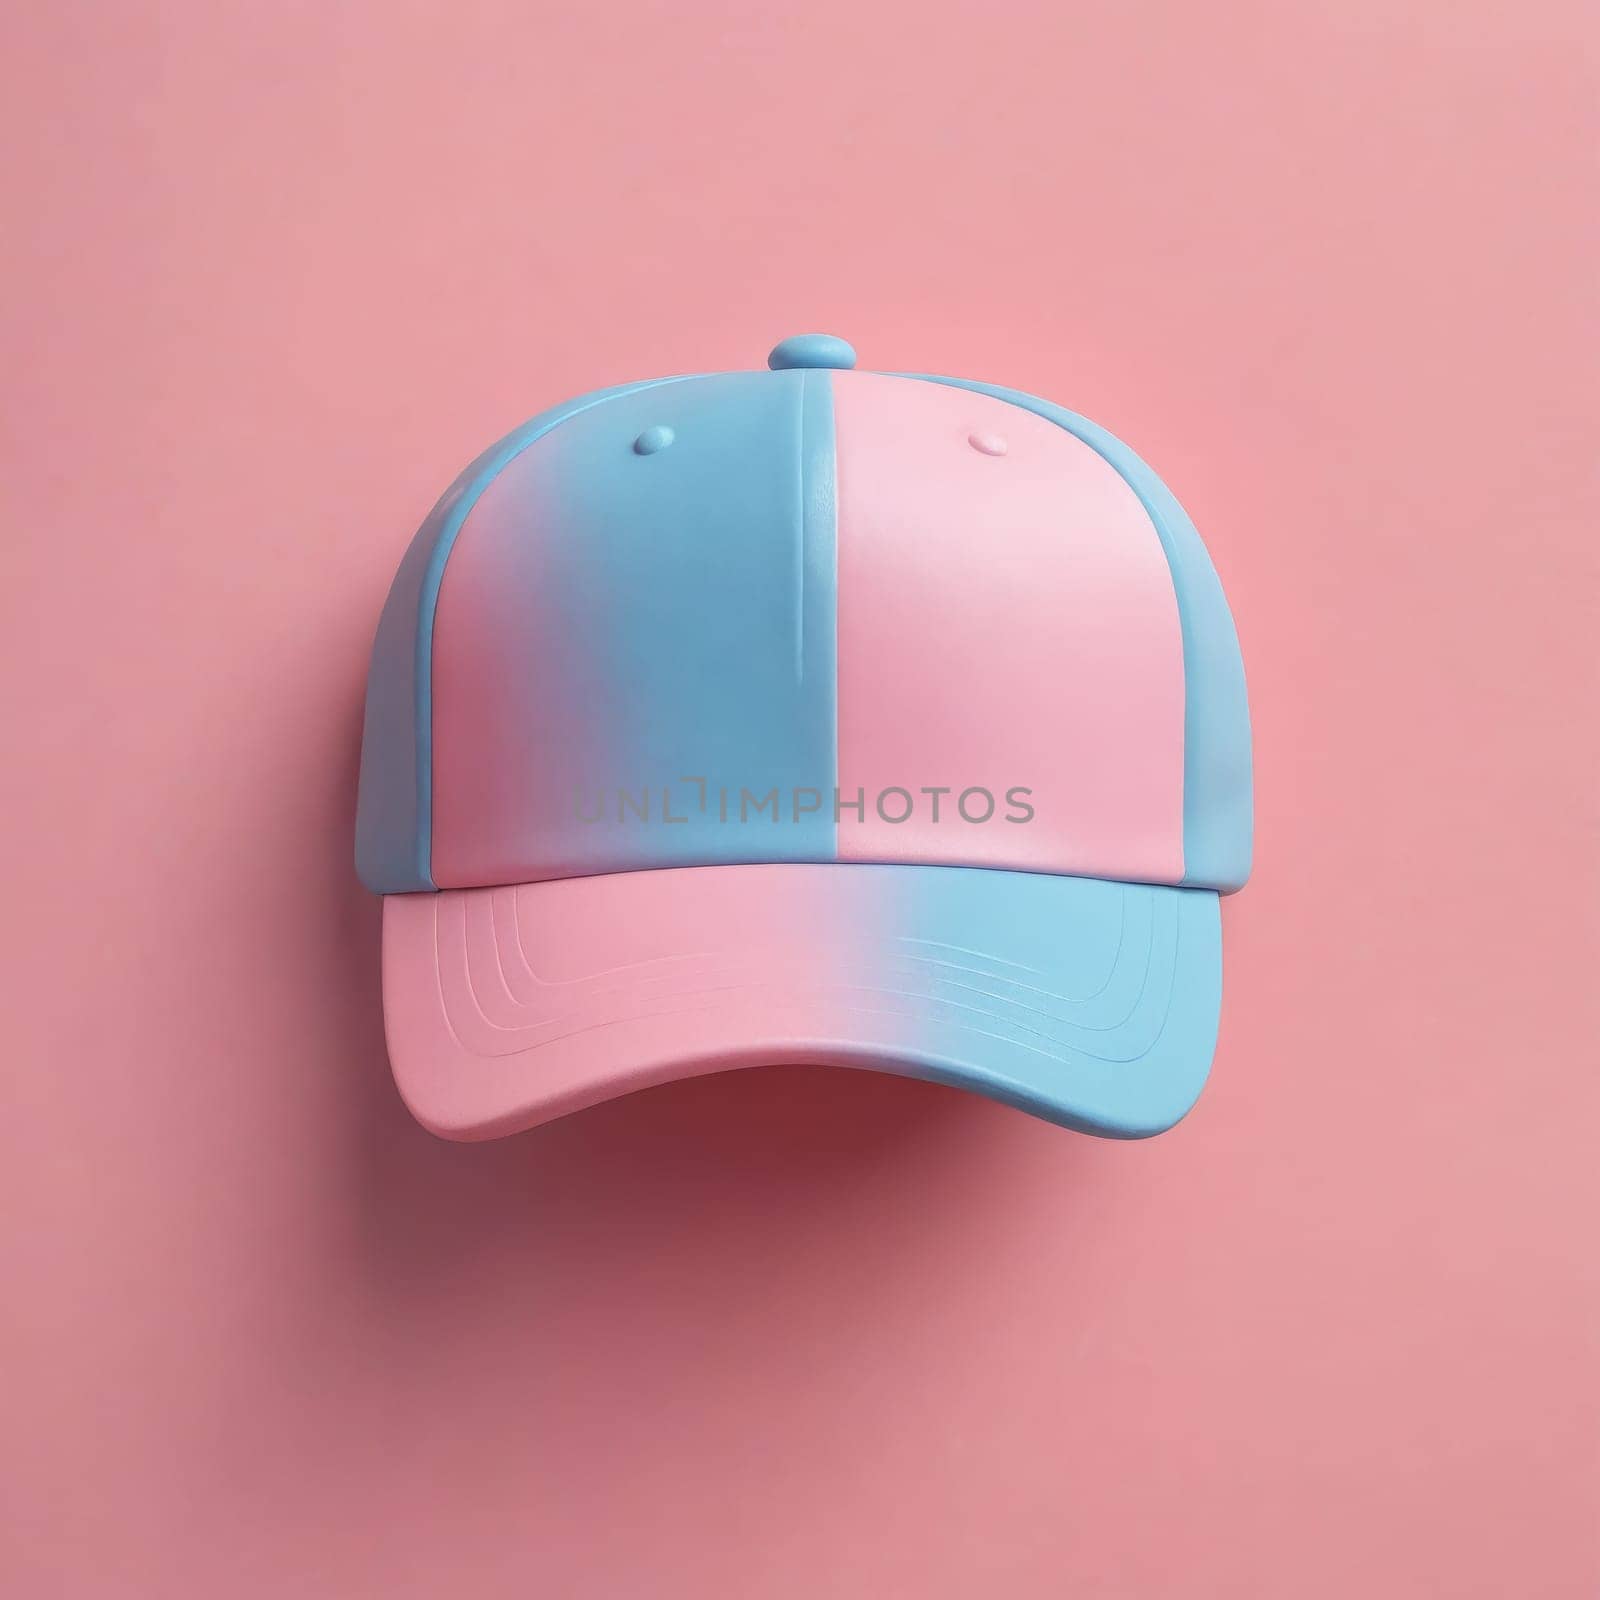 Magenta and electric blue baseball cap on pink background by Andre1ns